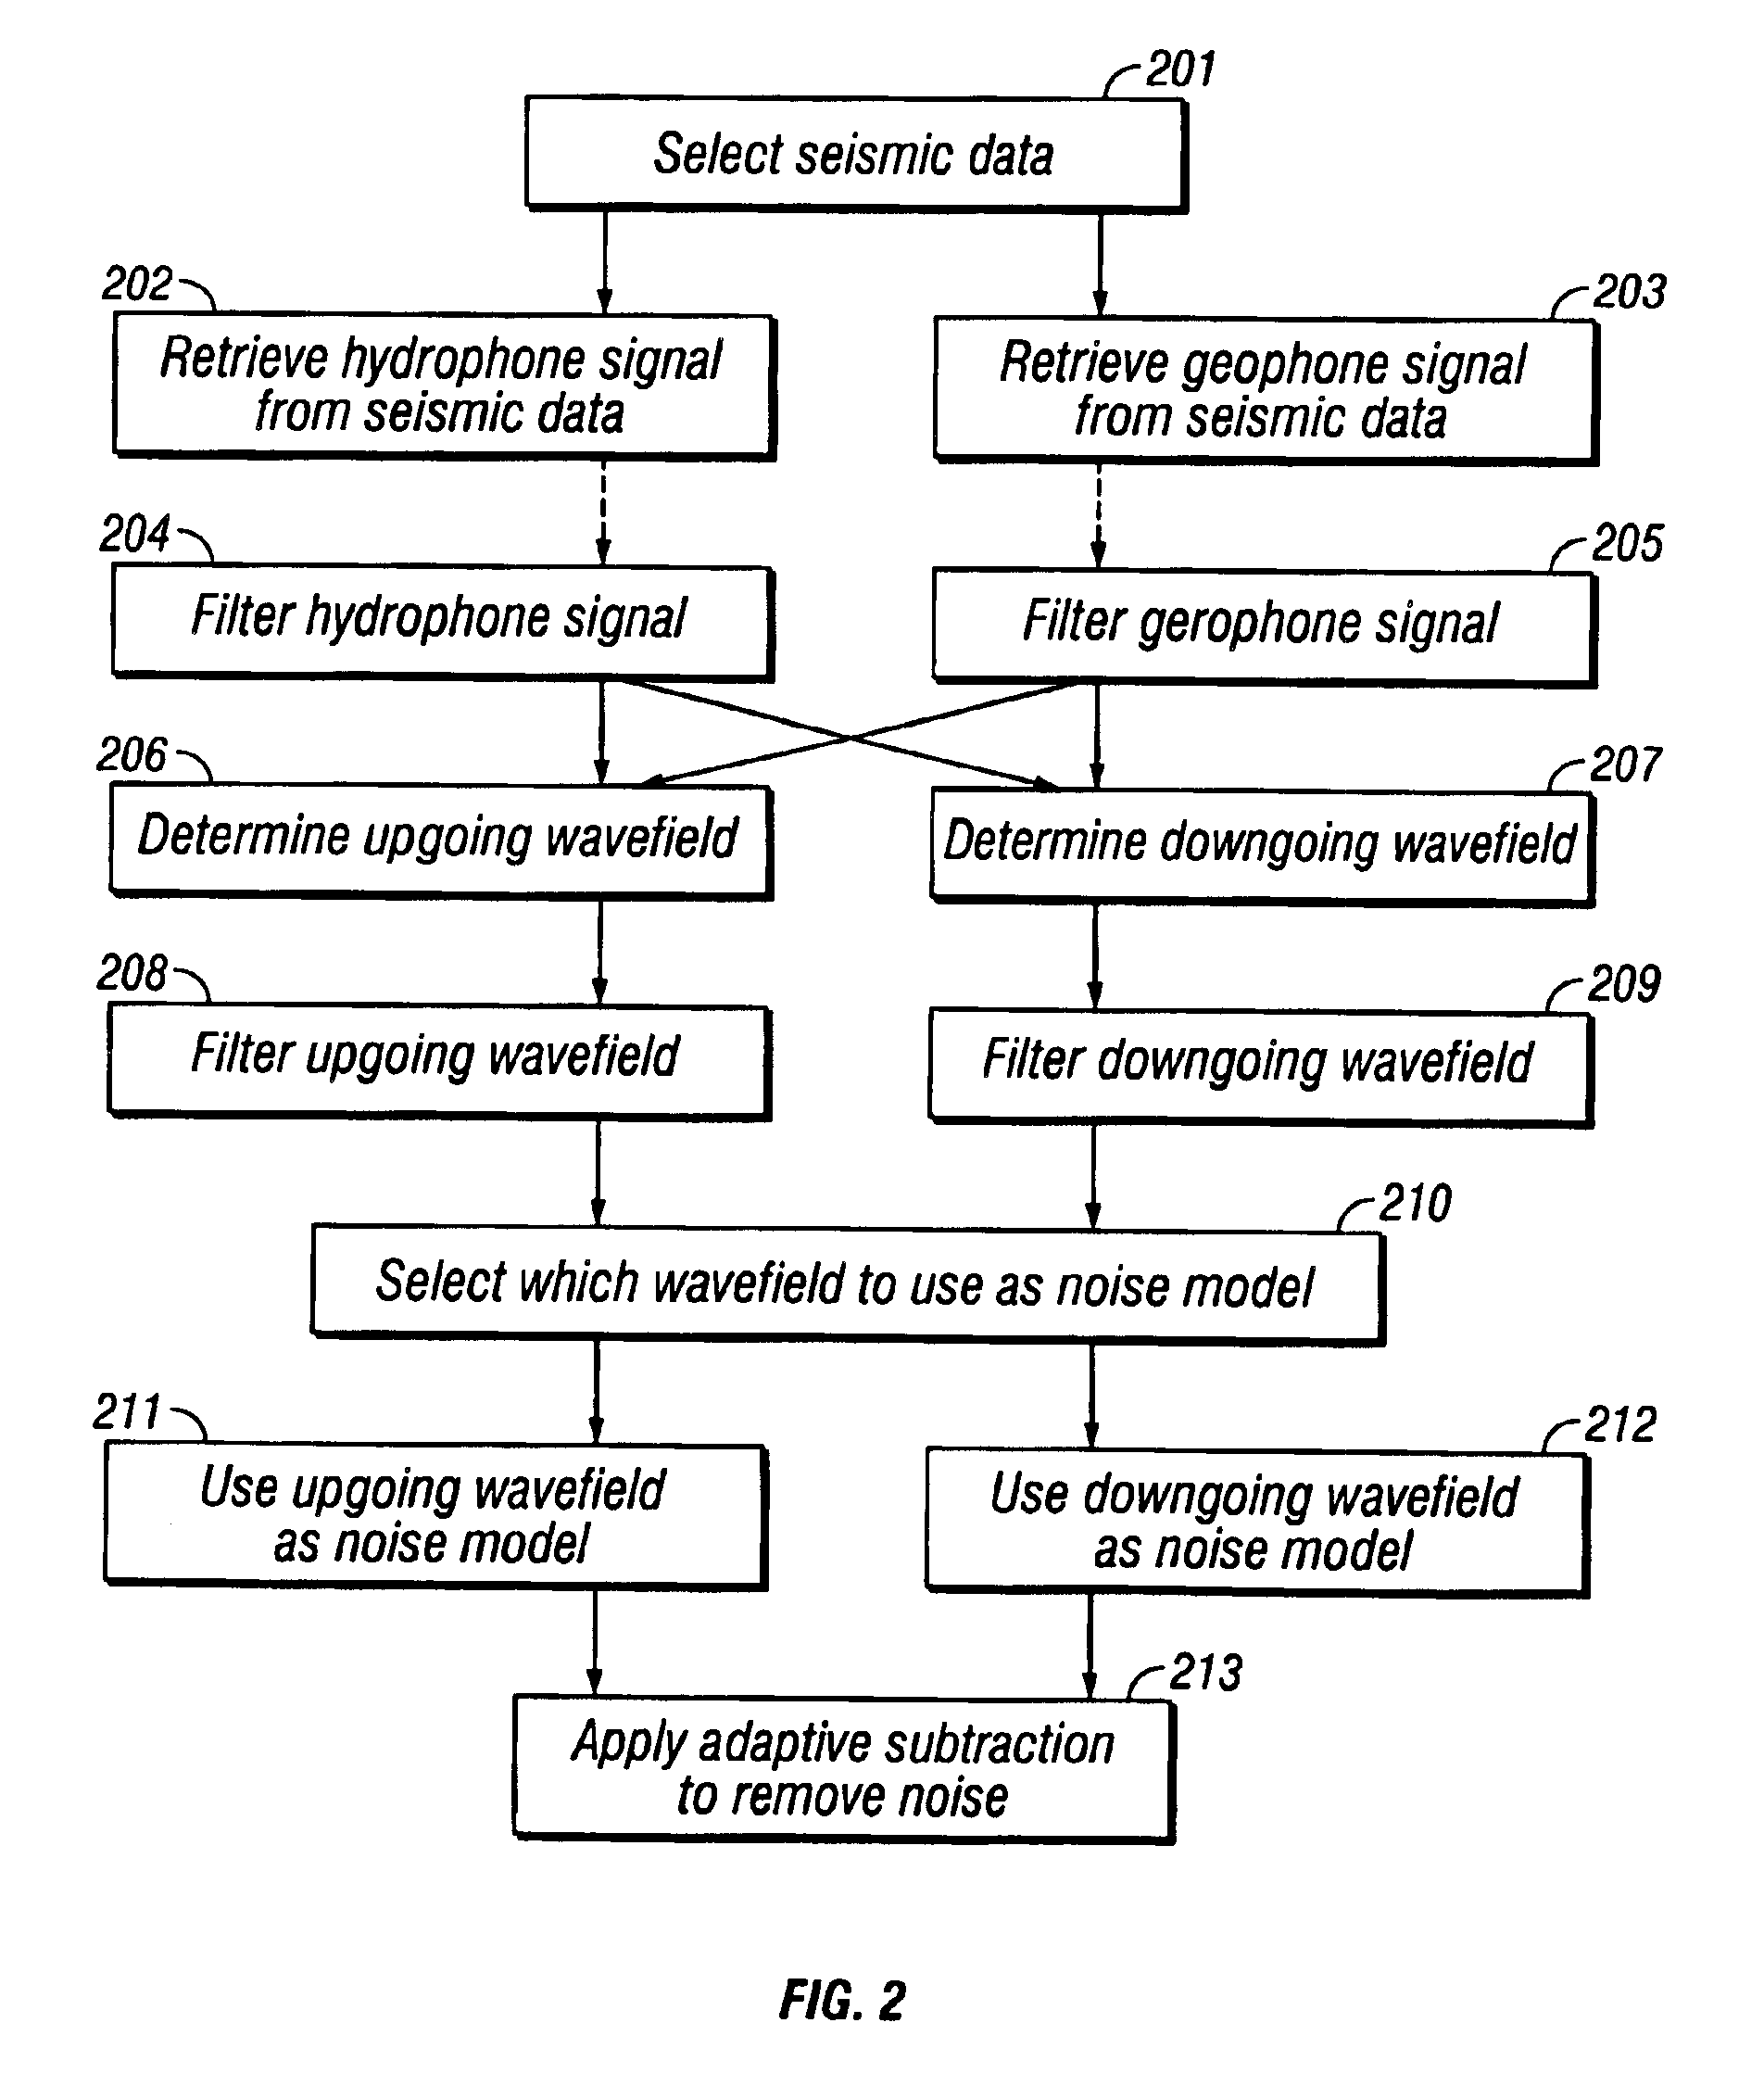 Method for processing dual sensor seismic data to attenuate noise